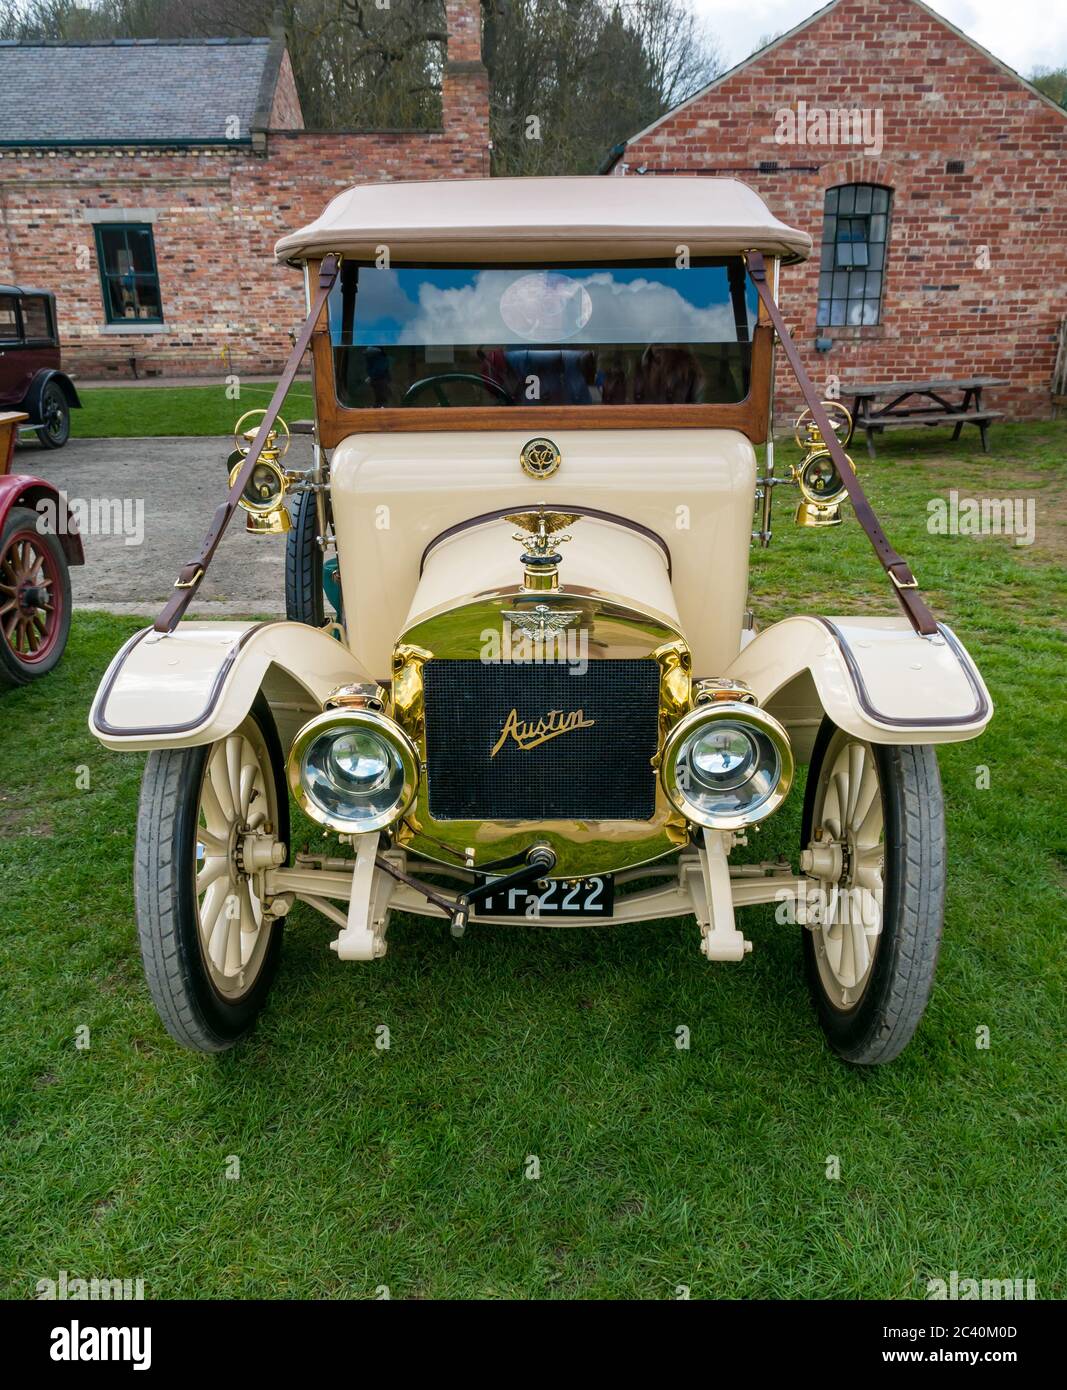 Vintage 1921 Austin car with crank handle, Great North Steam Fair, Beamish, Durham County, England, UK Stock Photo